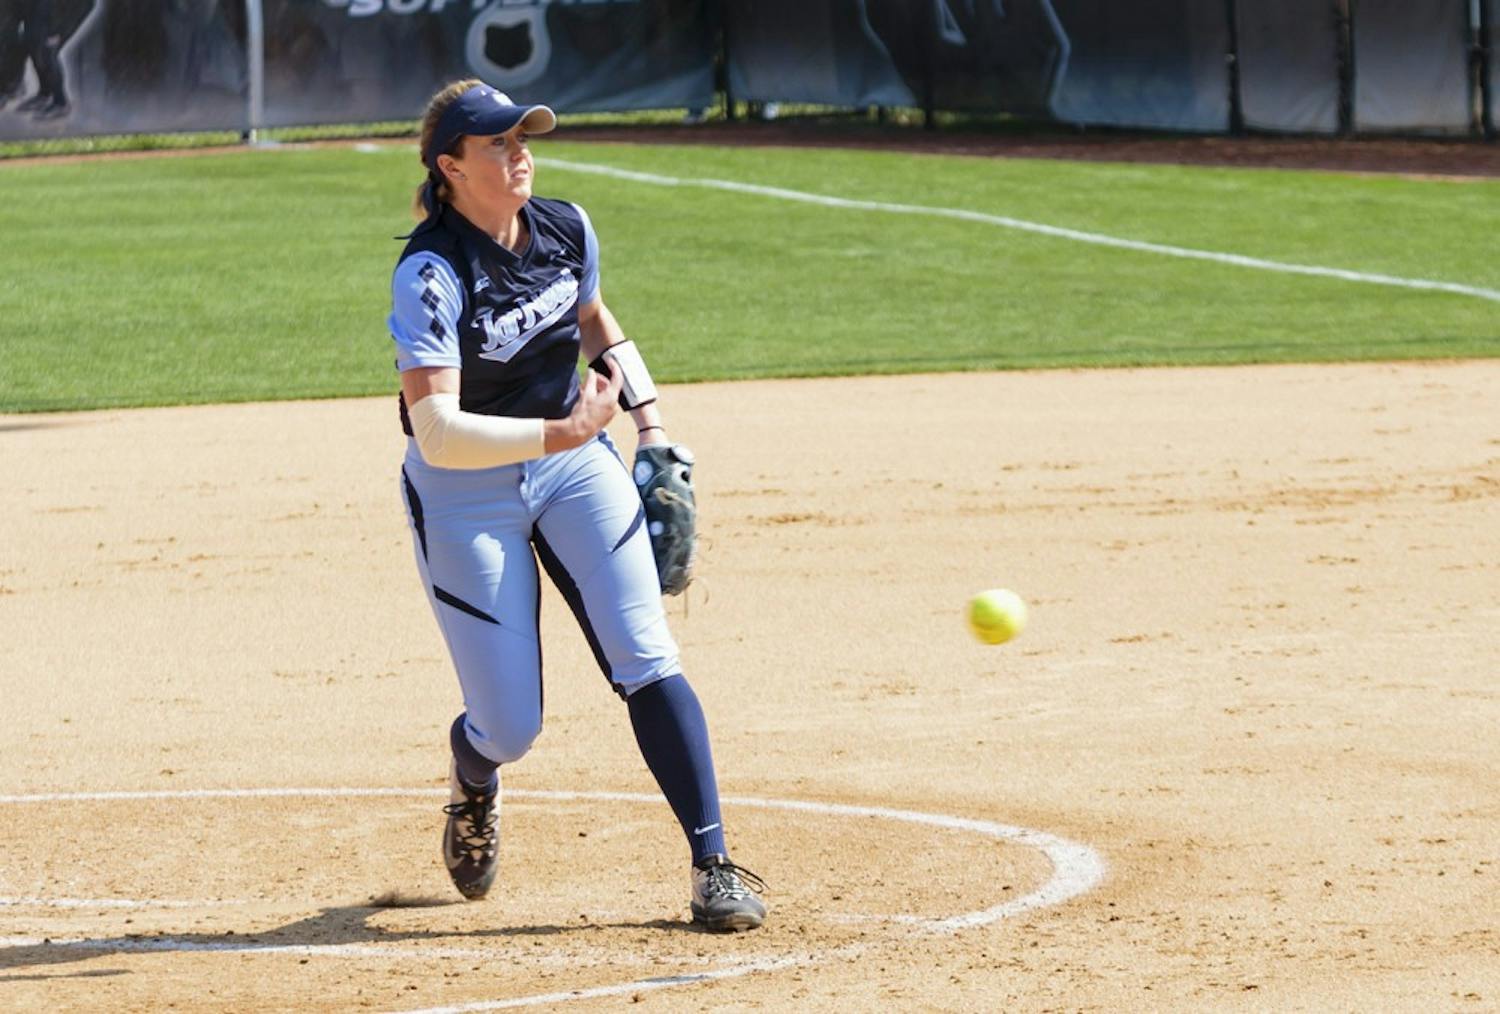 North Carolina pitcher Kendra Lynch (15) throws a pitch in Saturday's game against&nbsp;Pittsburgh.